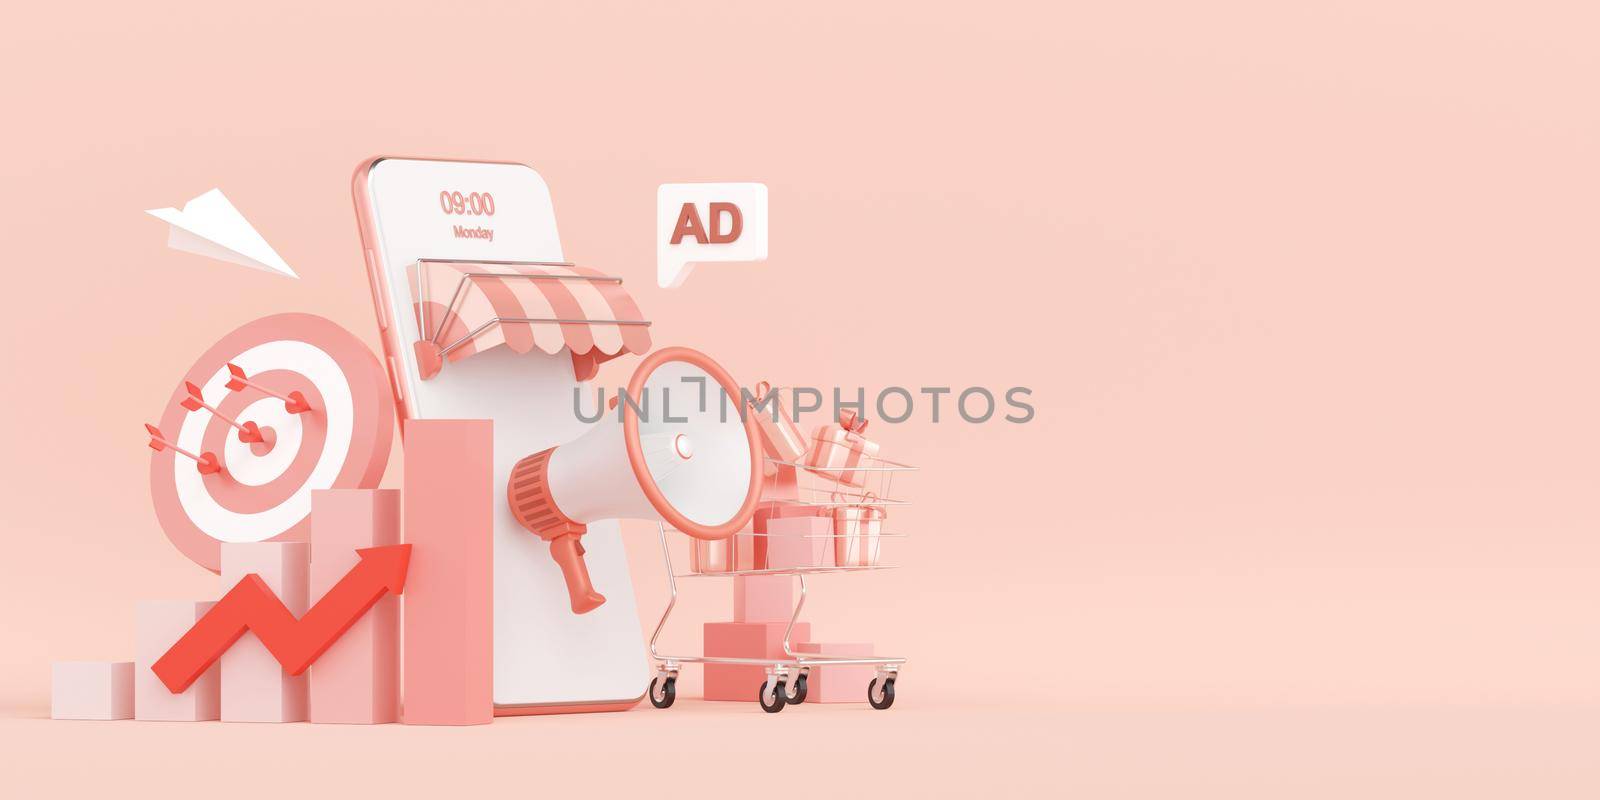 3d illustration of Shooting advertisements for online sales to be effective and targeted.